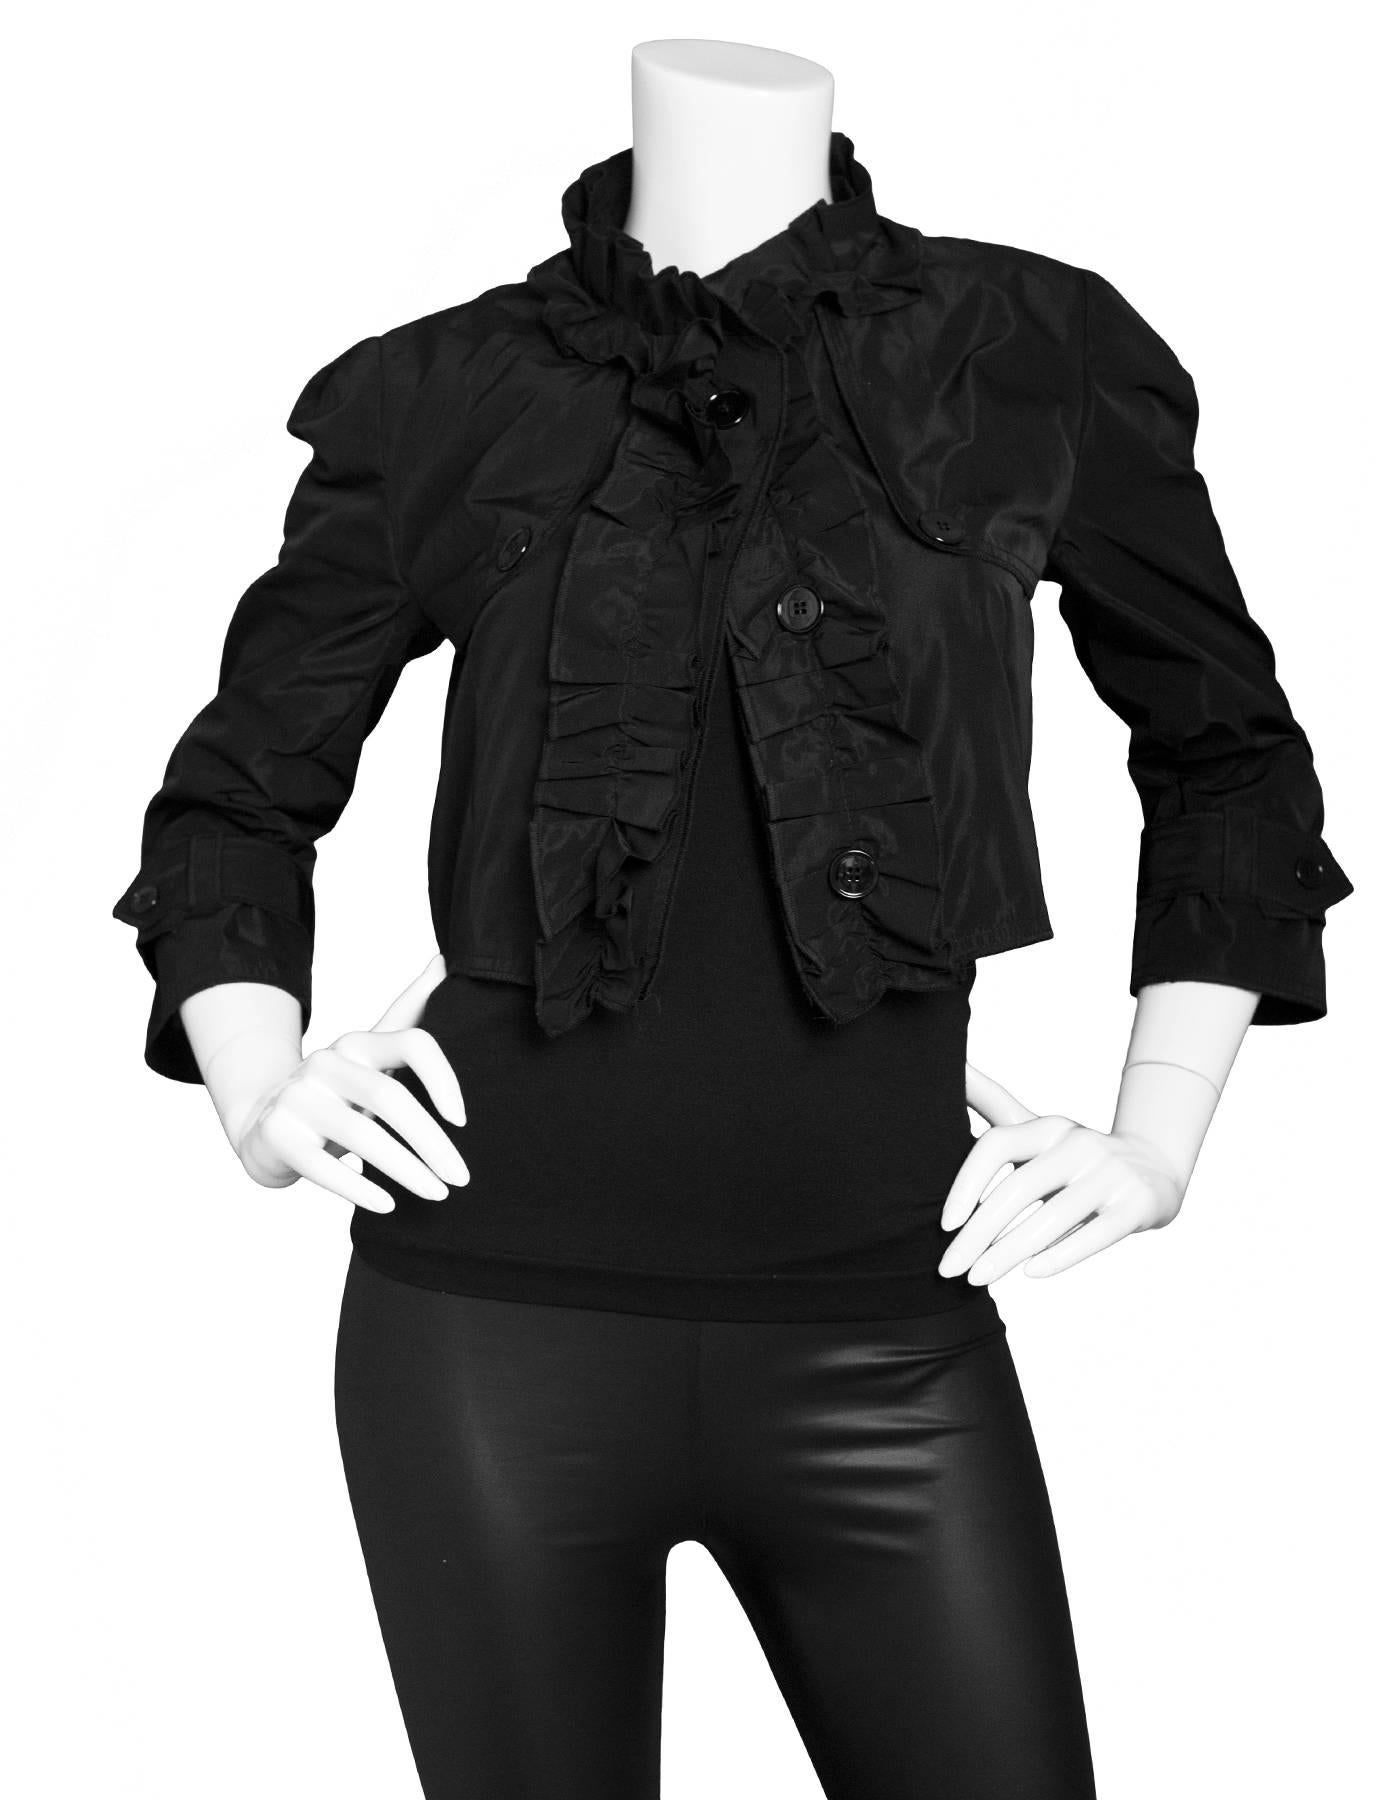 Dolce & Gabbana Black Cropped Jacket 
Features ruffle detail at neckline and down jacket opening

Made In: Italy
Color: Black
Composition: 100% polyester
Lining: Black, 100% silk
Closure/Opening: Button down front closure
Exterior Pockets: